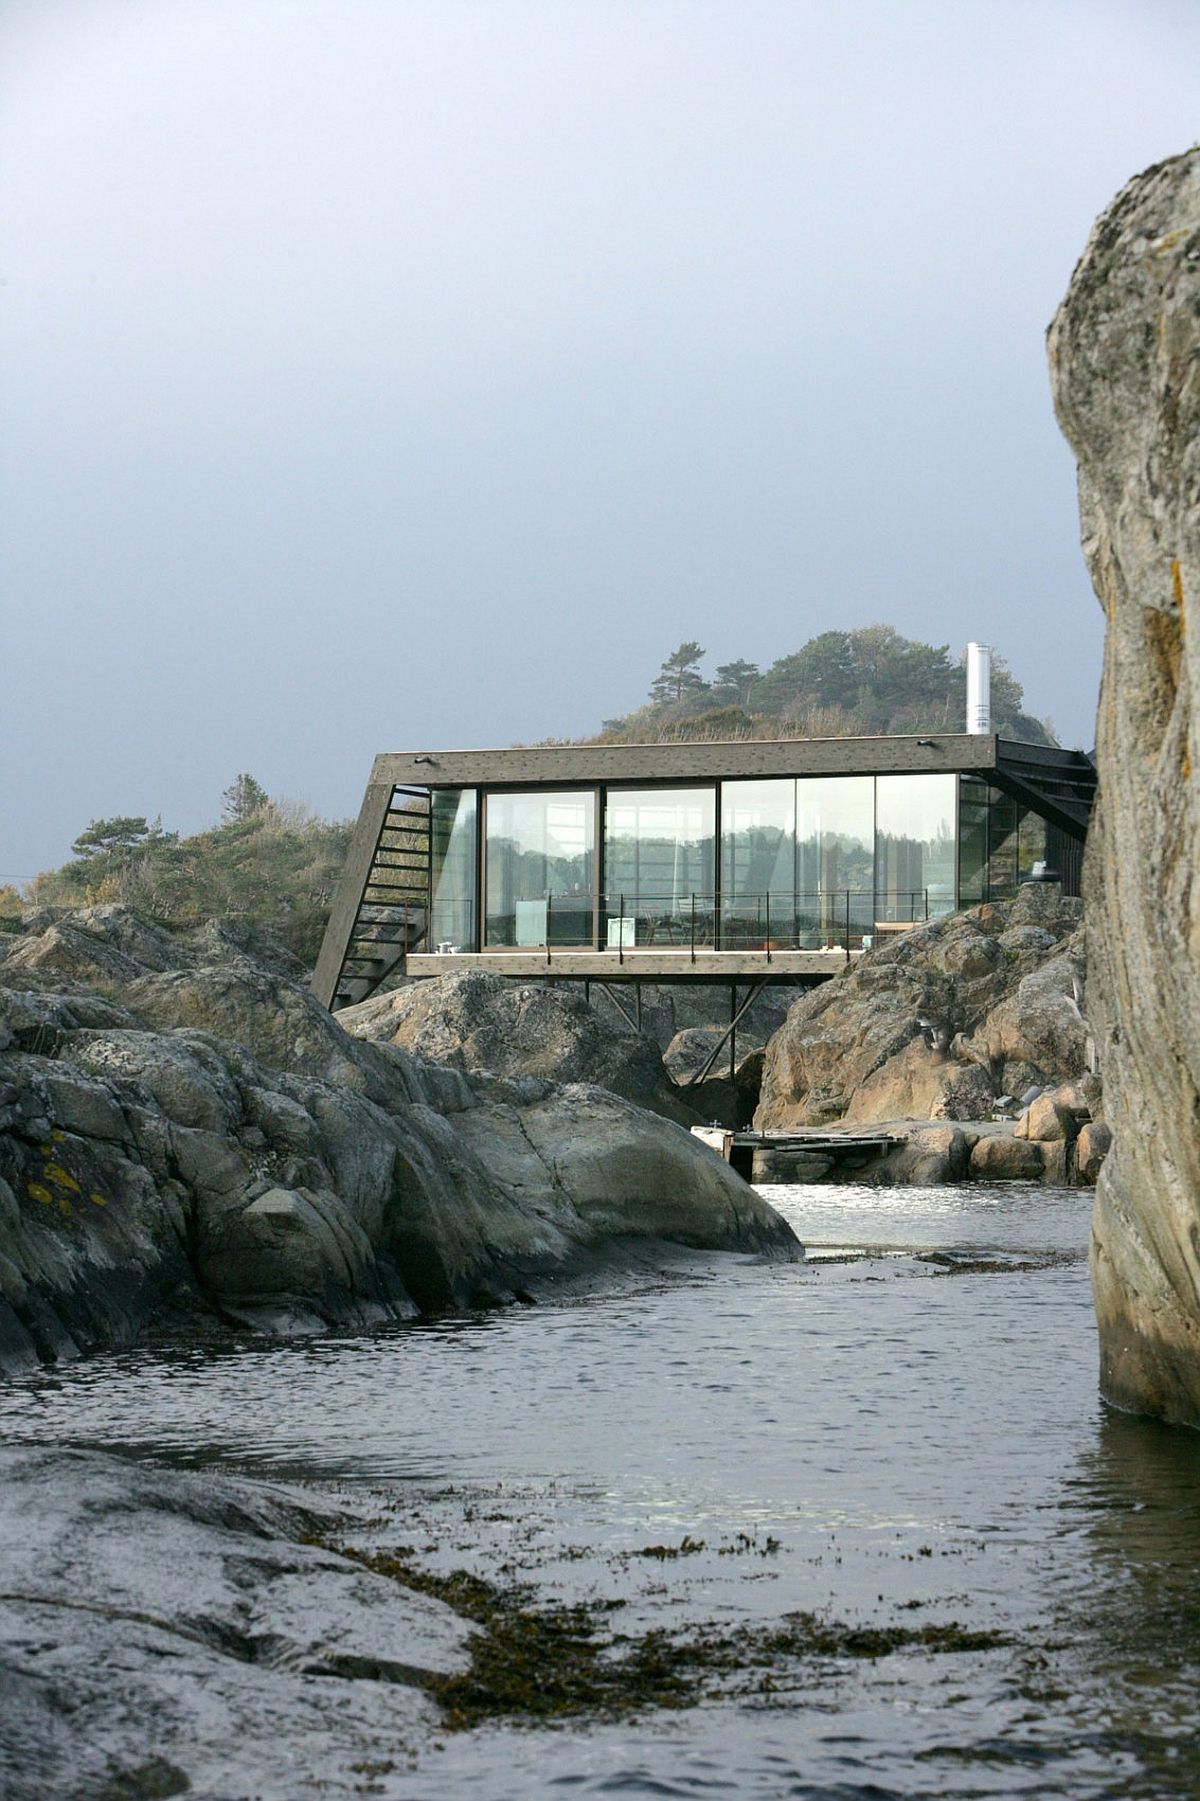 Innovative holiday home combines several small rocky islets